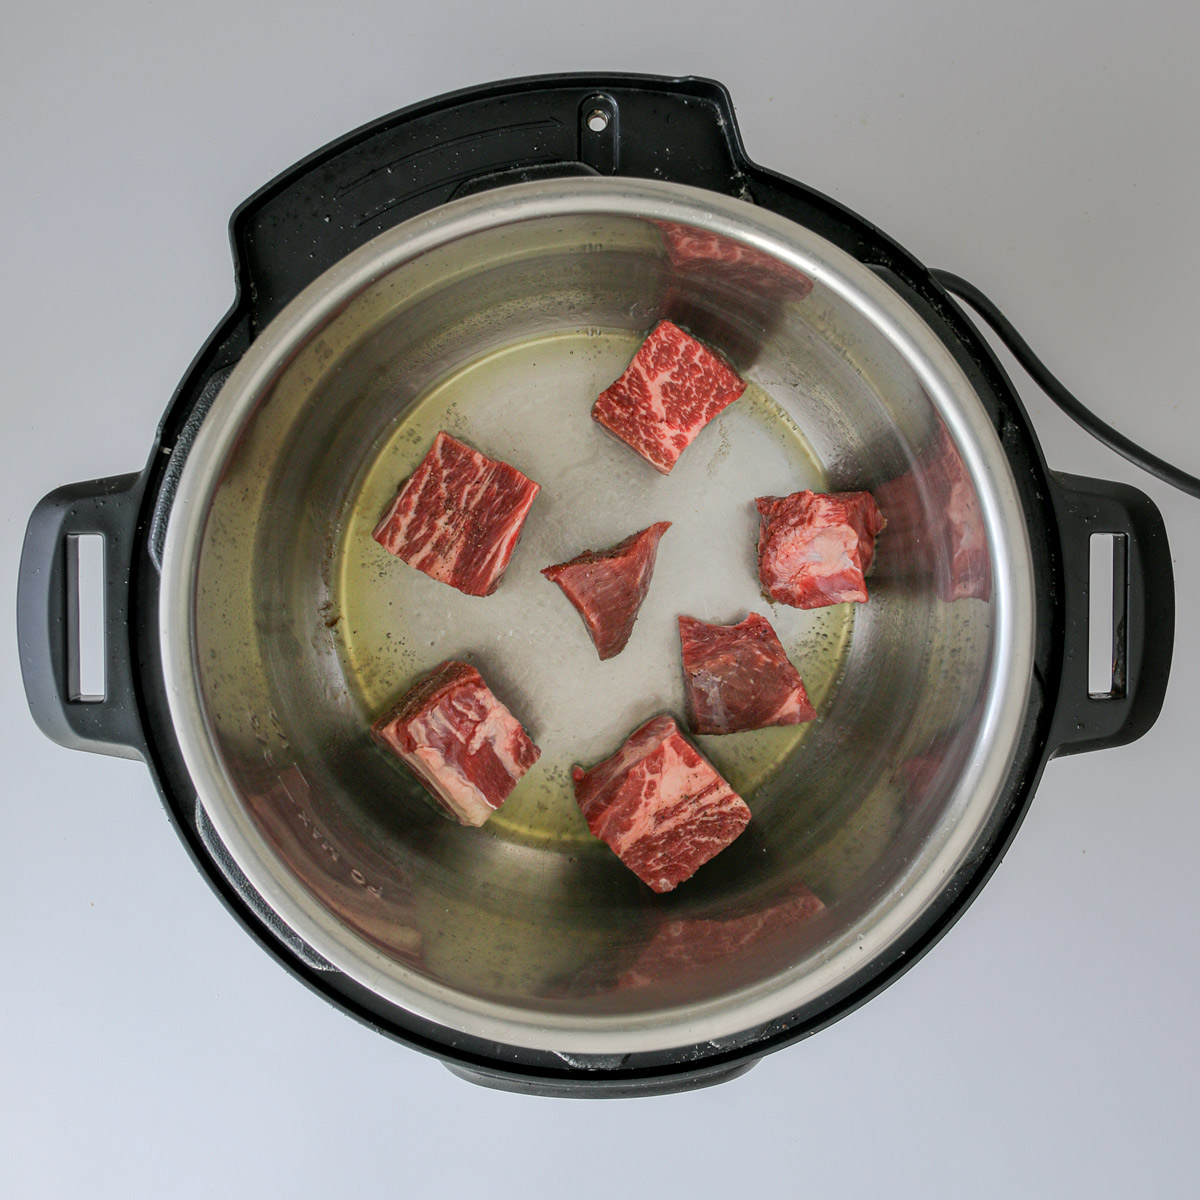 raw meat cubes in hot oil in pressure cooker.